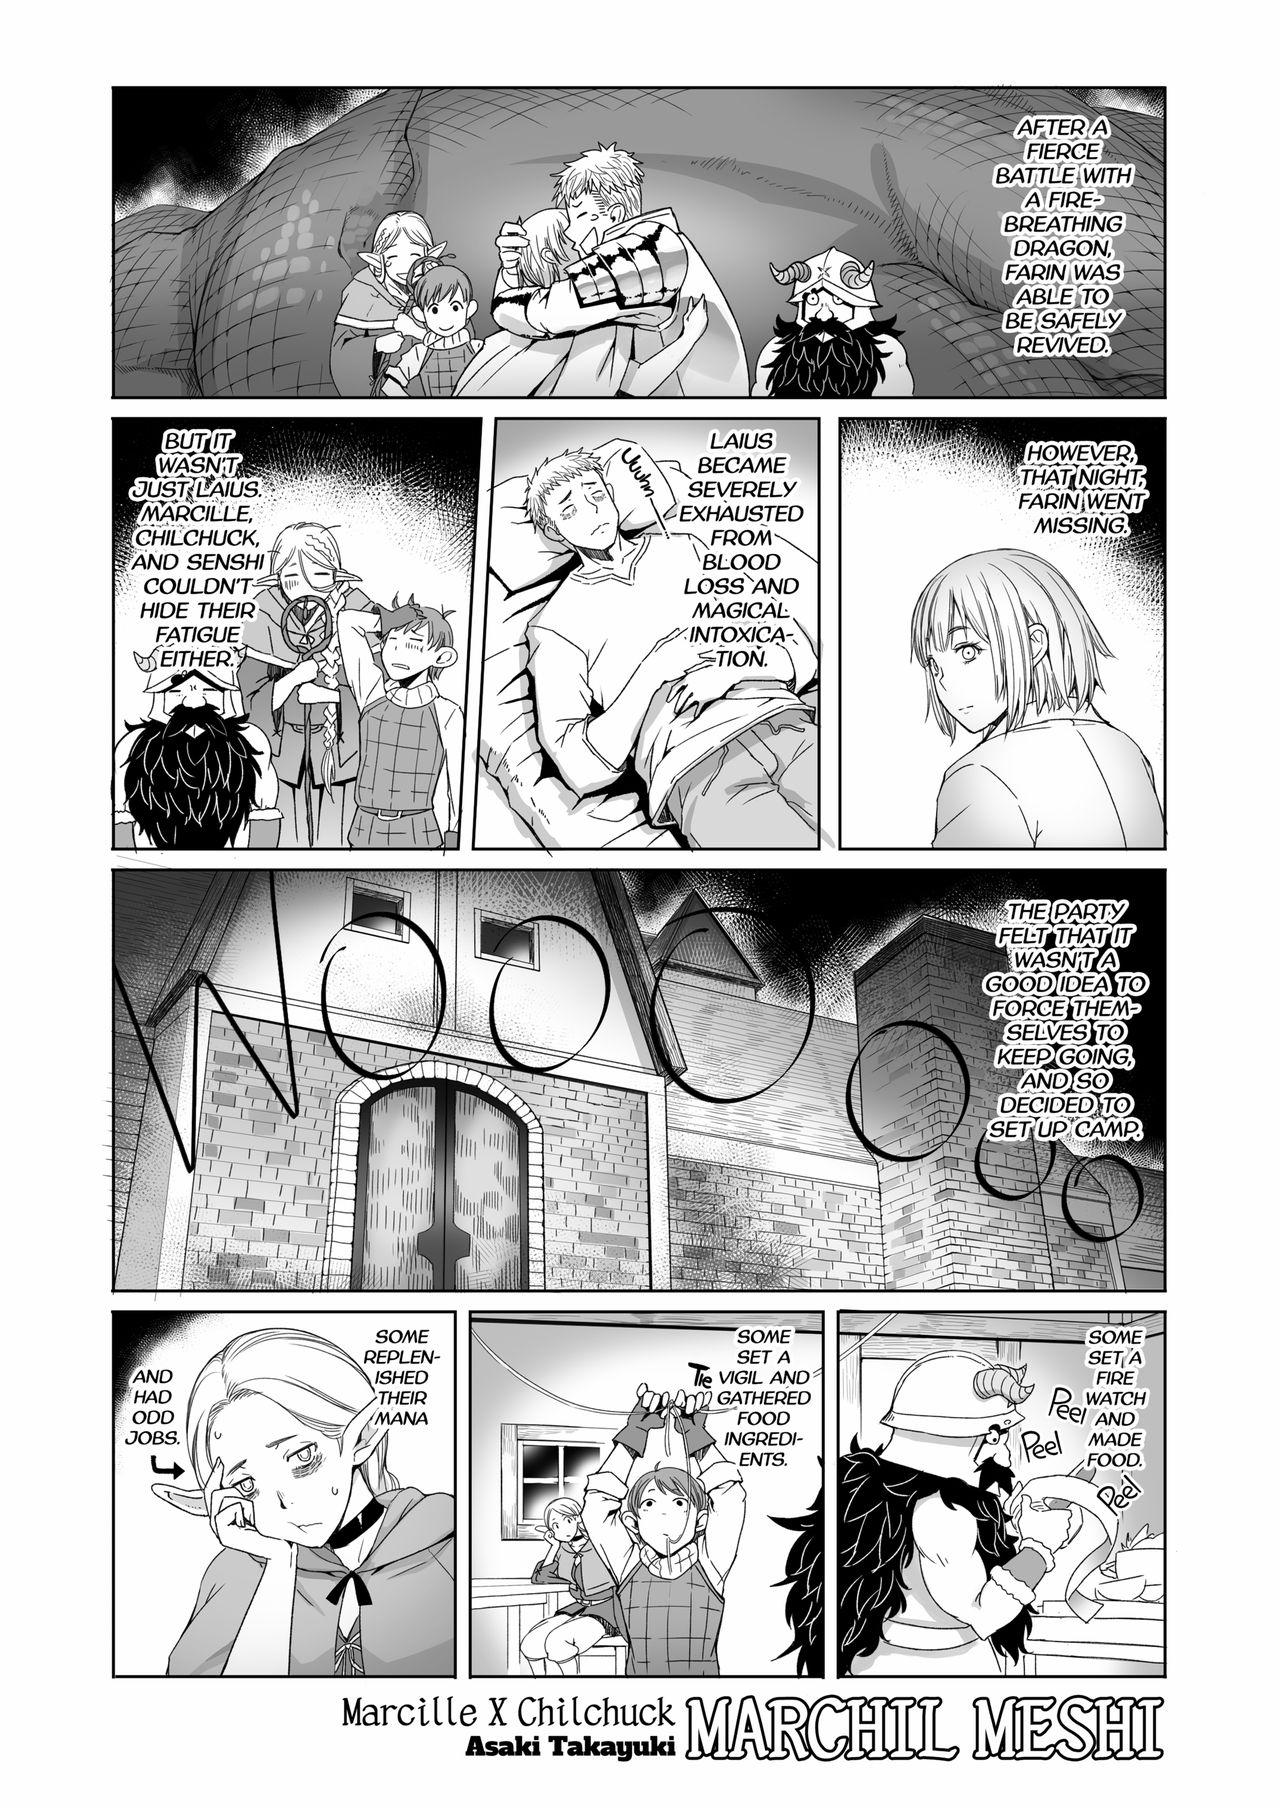 Livesex Marchil Meshi - Dungeon meshi Fat Ass - Page 2